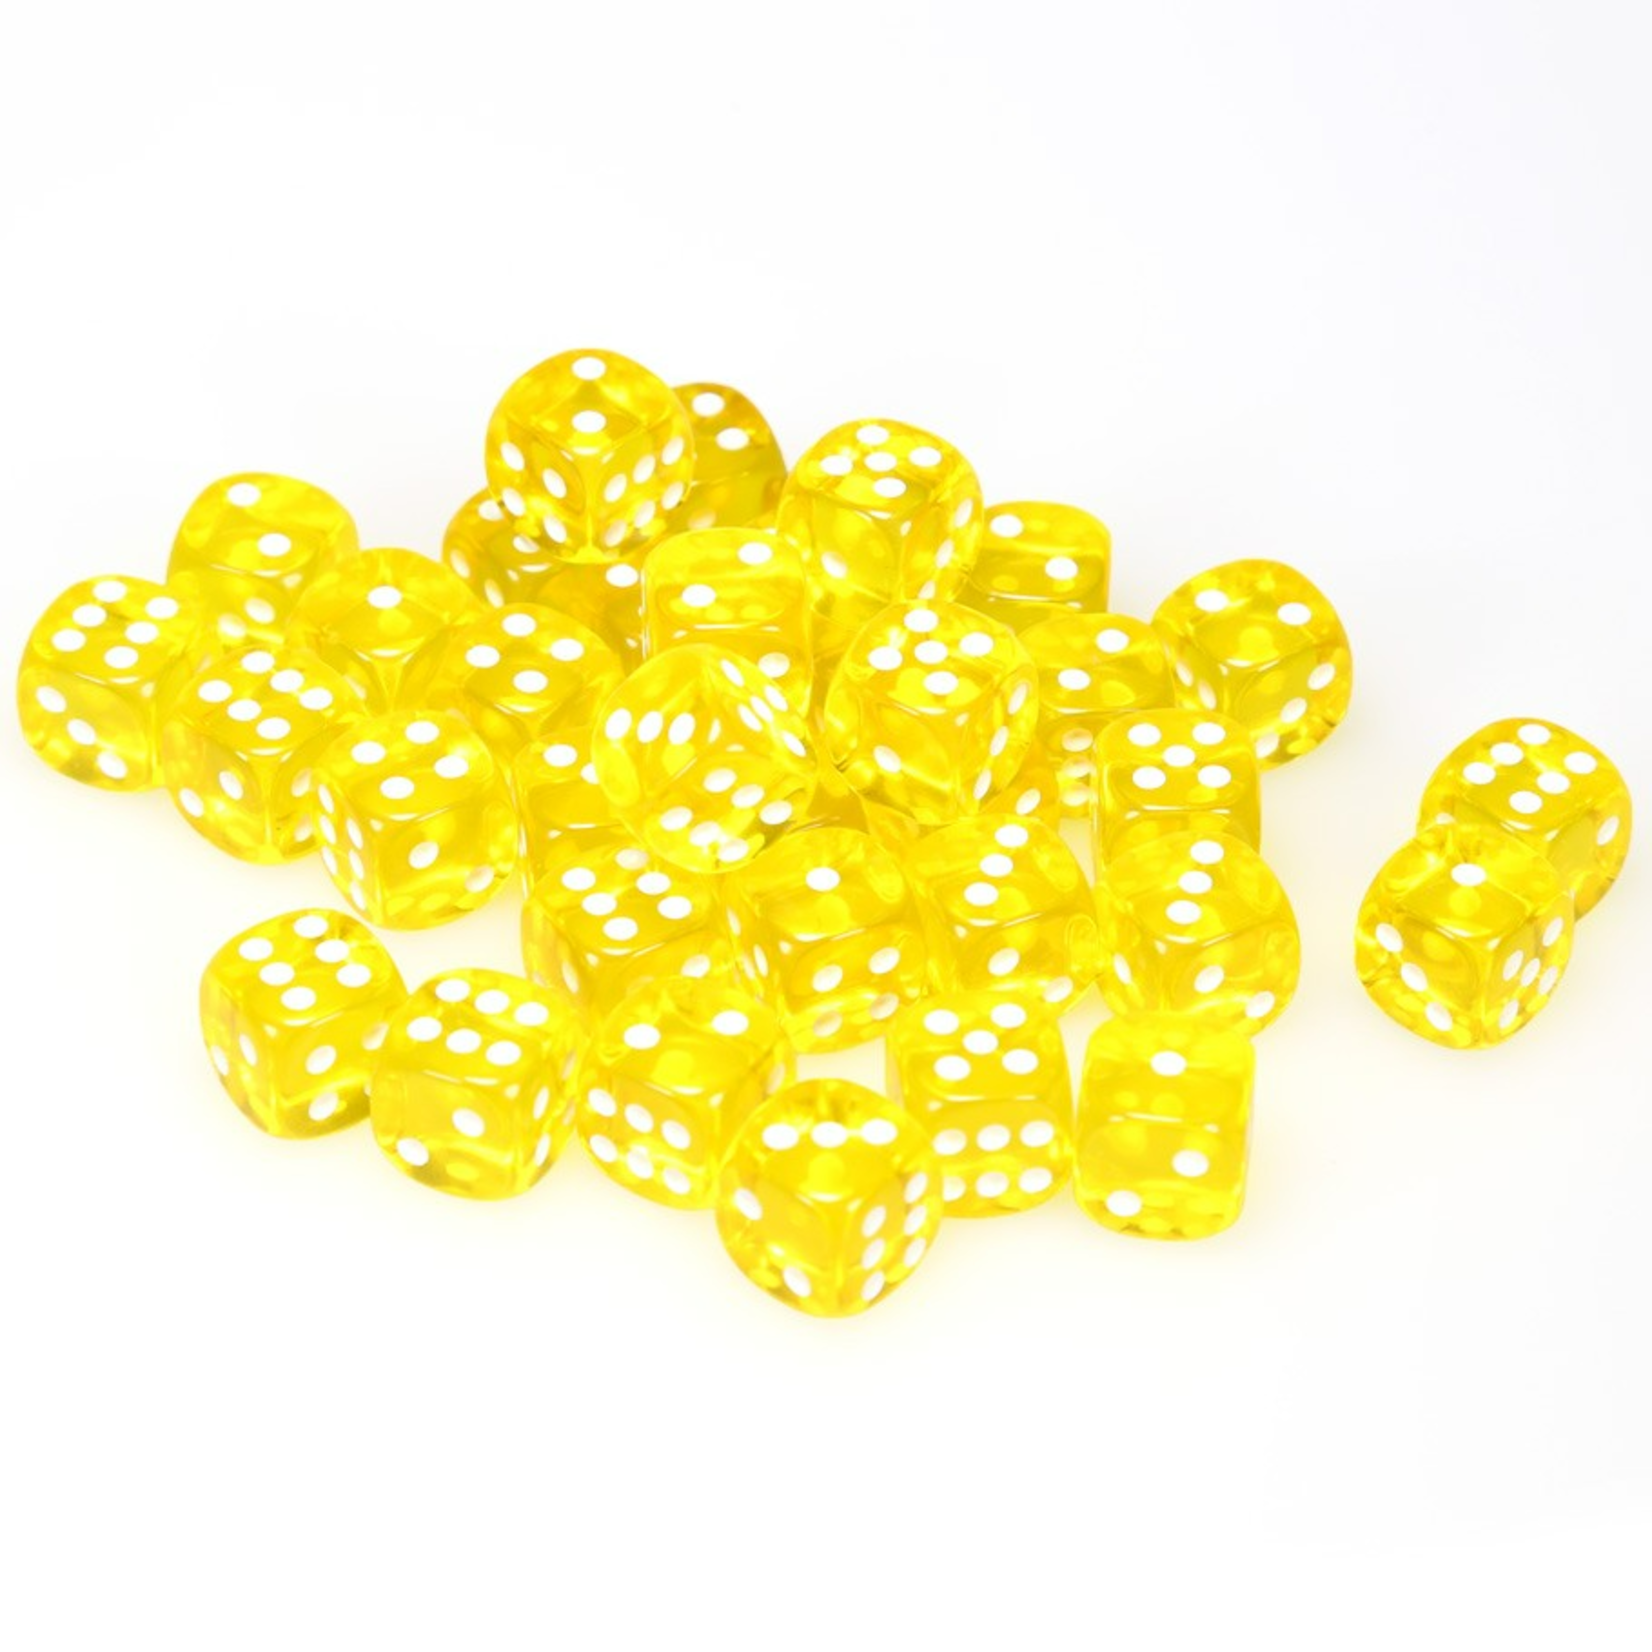 Chessex Chessex Translucent Yellow with White 12 mm d6 36 die set